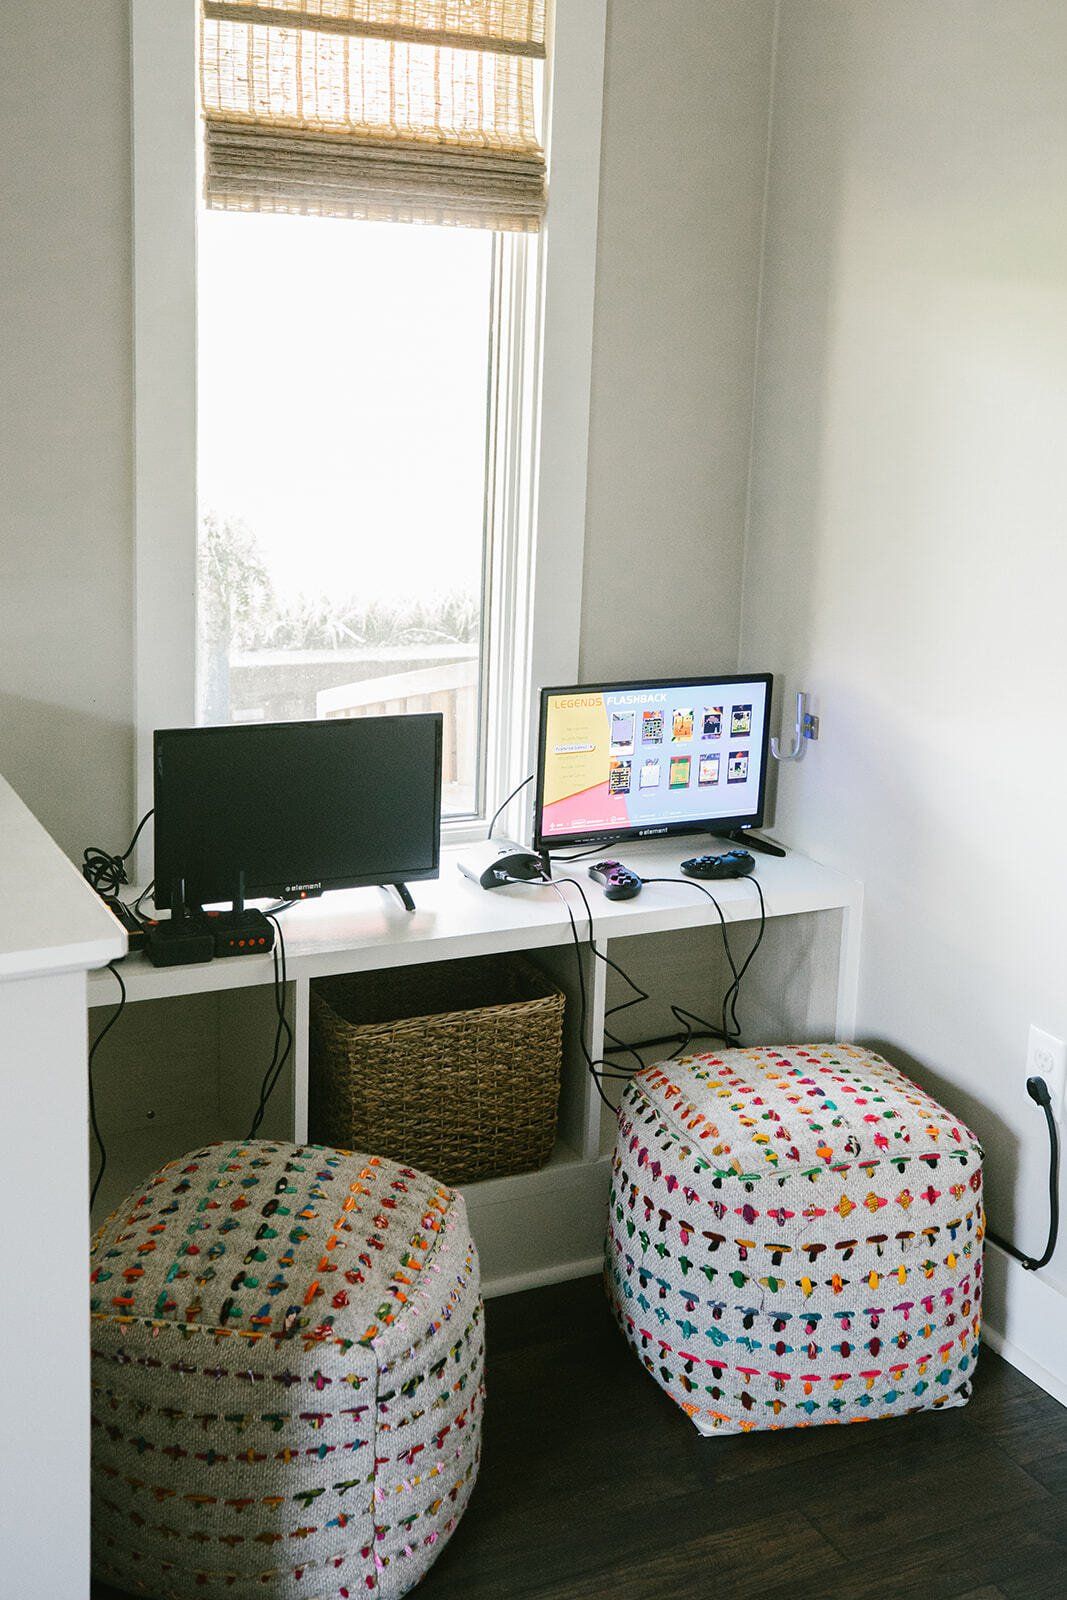 There is a desk with a computer on it and two ottomans.